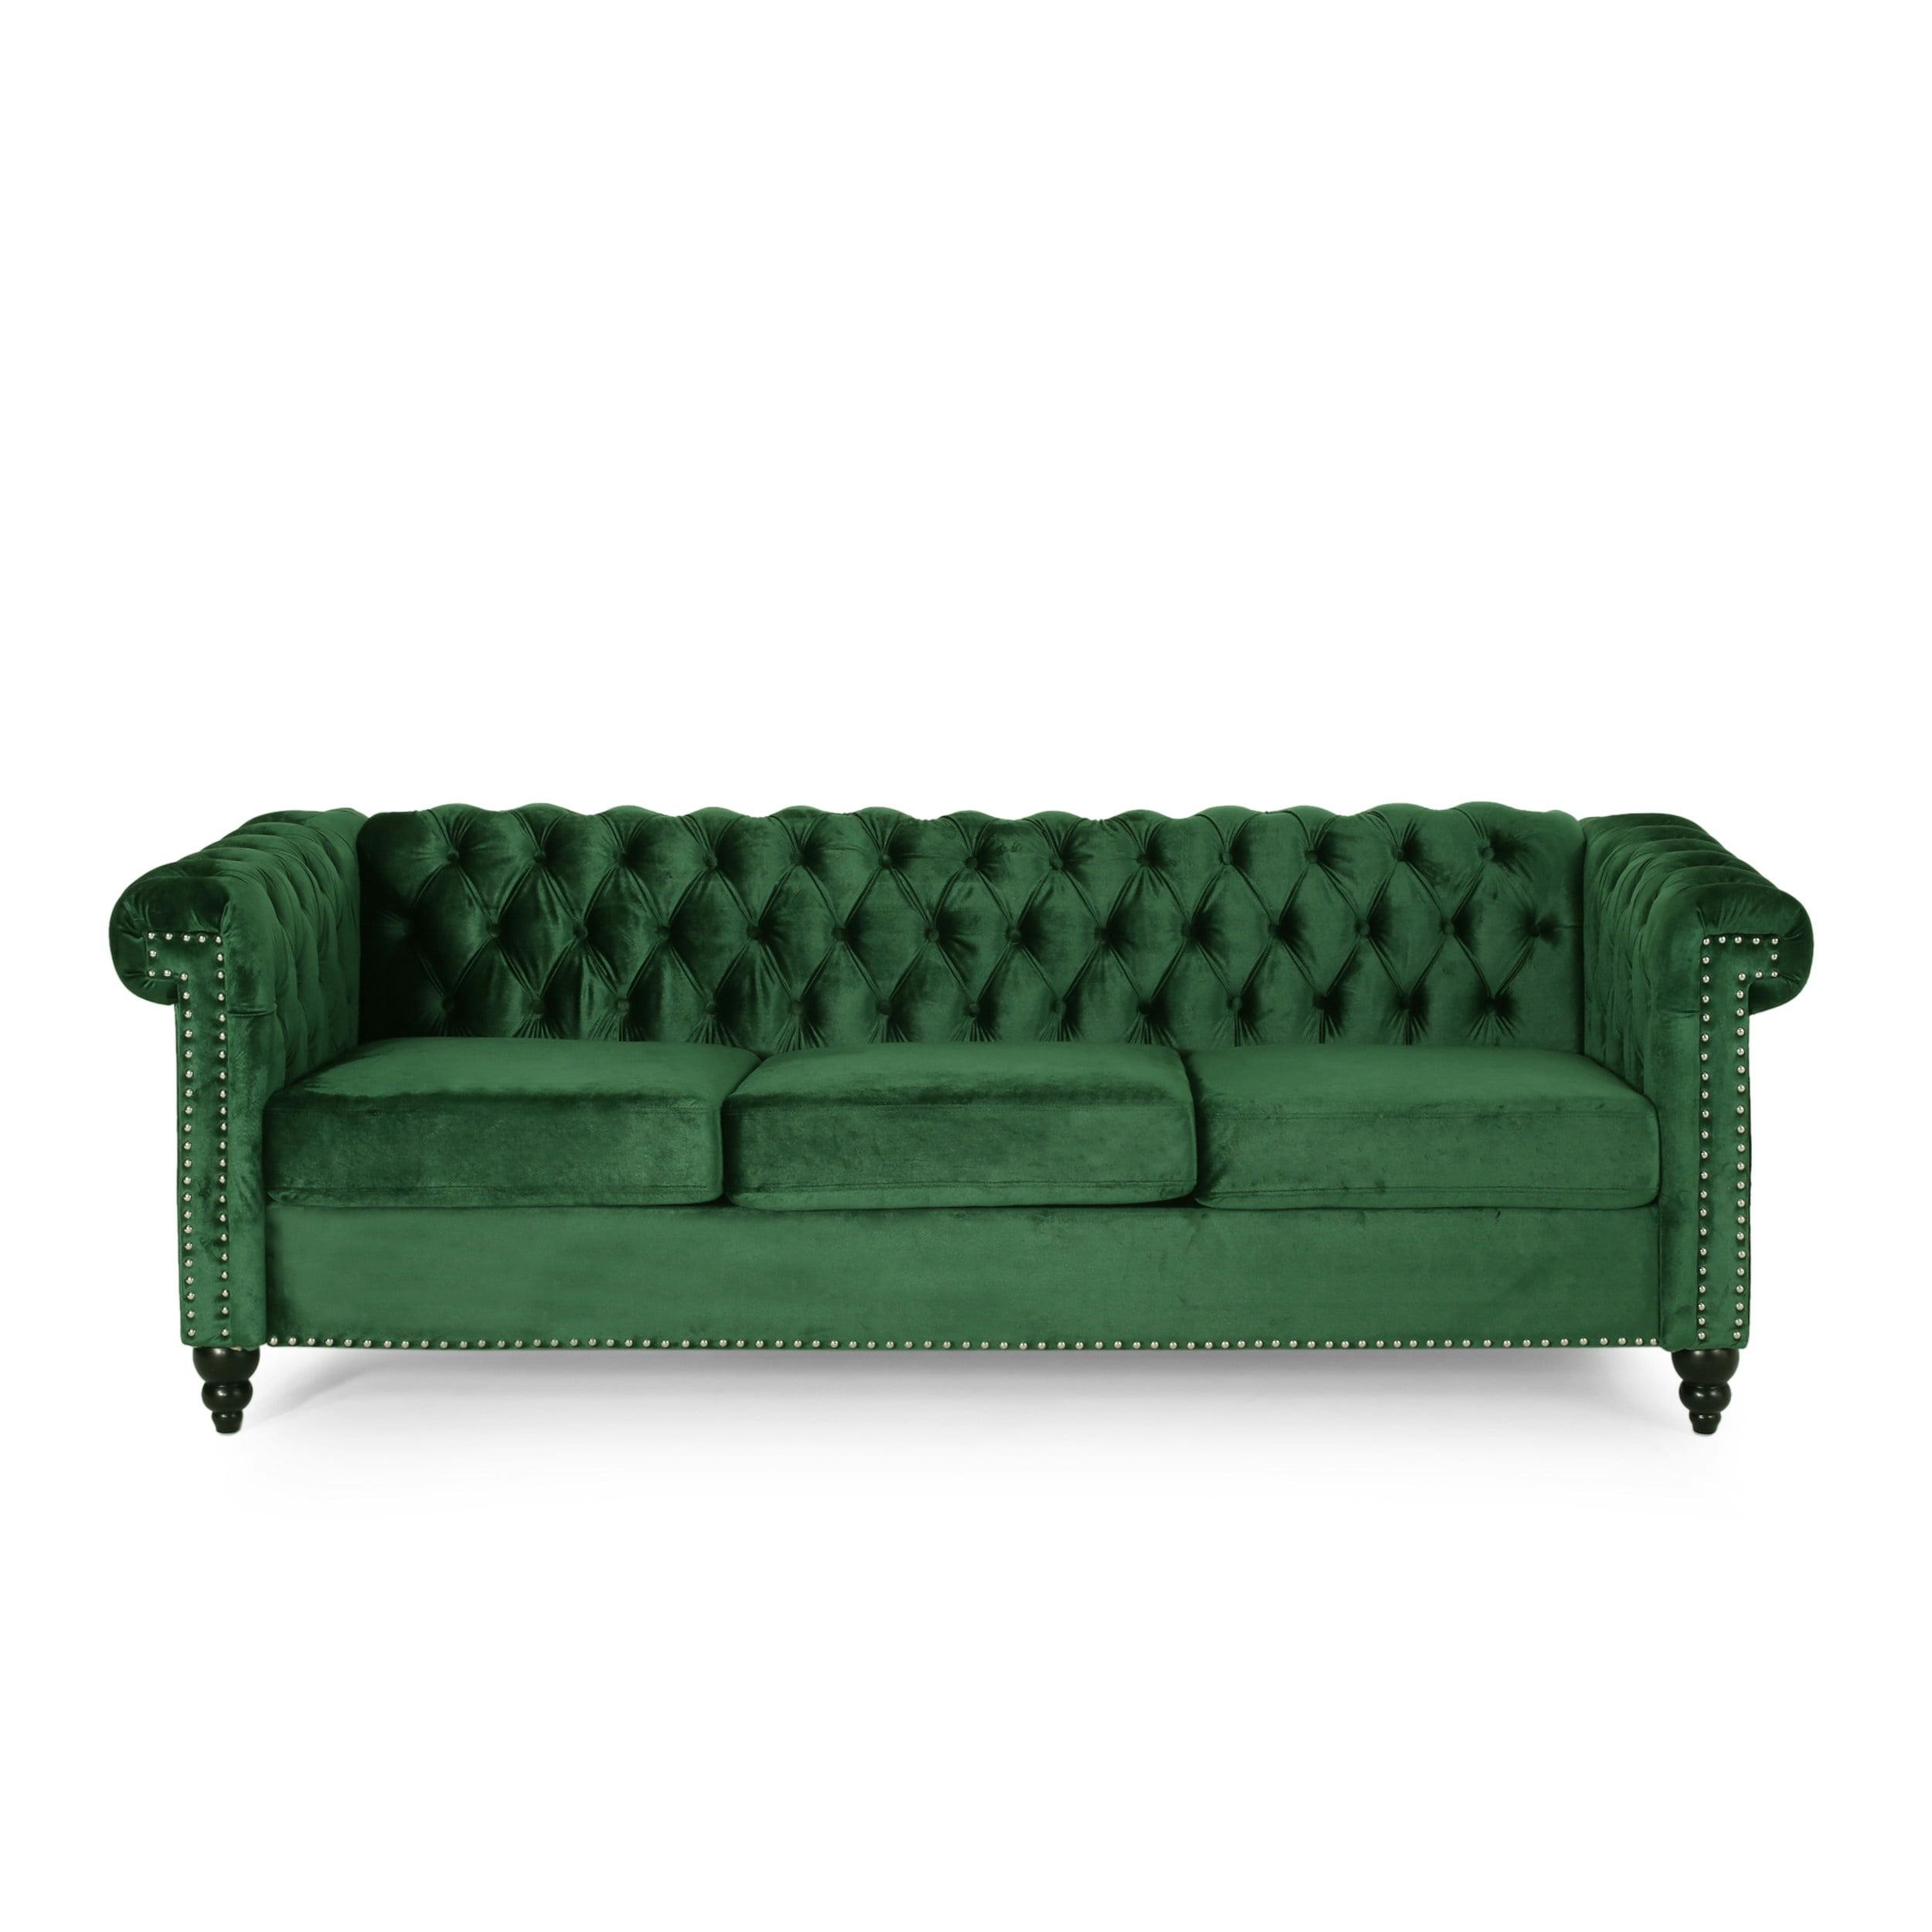 Elegant Emerald Velvet Tufted Chesterfield Sofa with Nailhead Accents